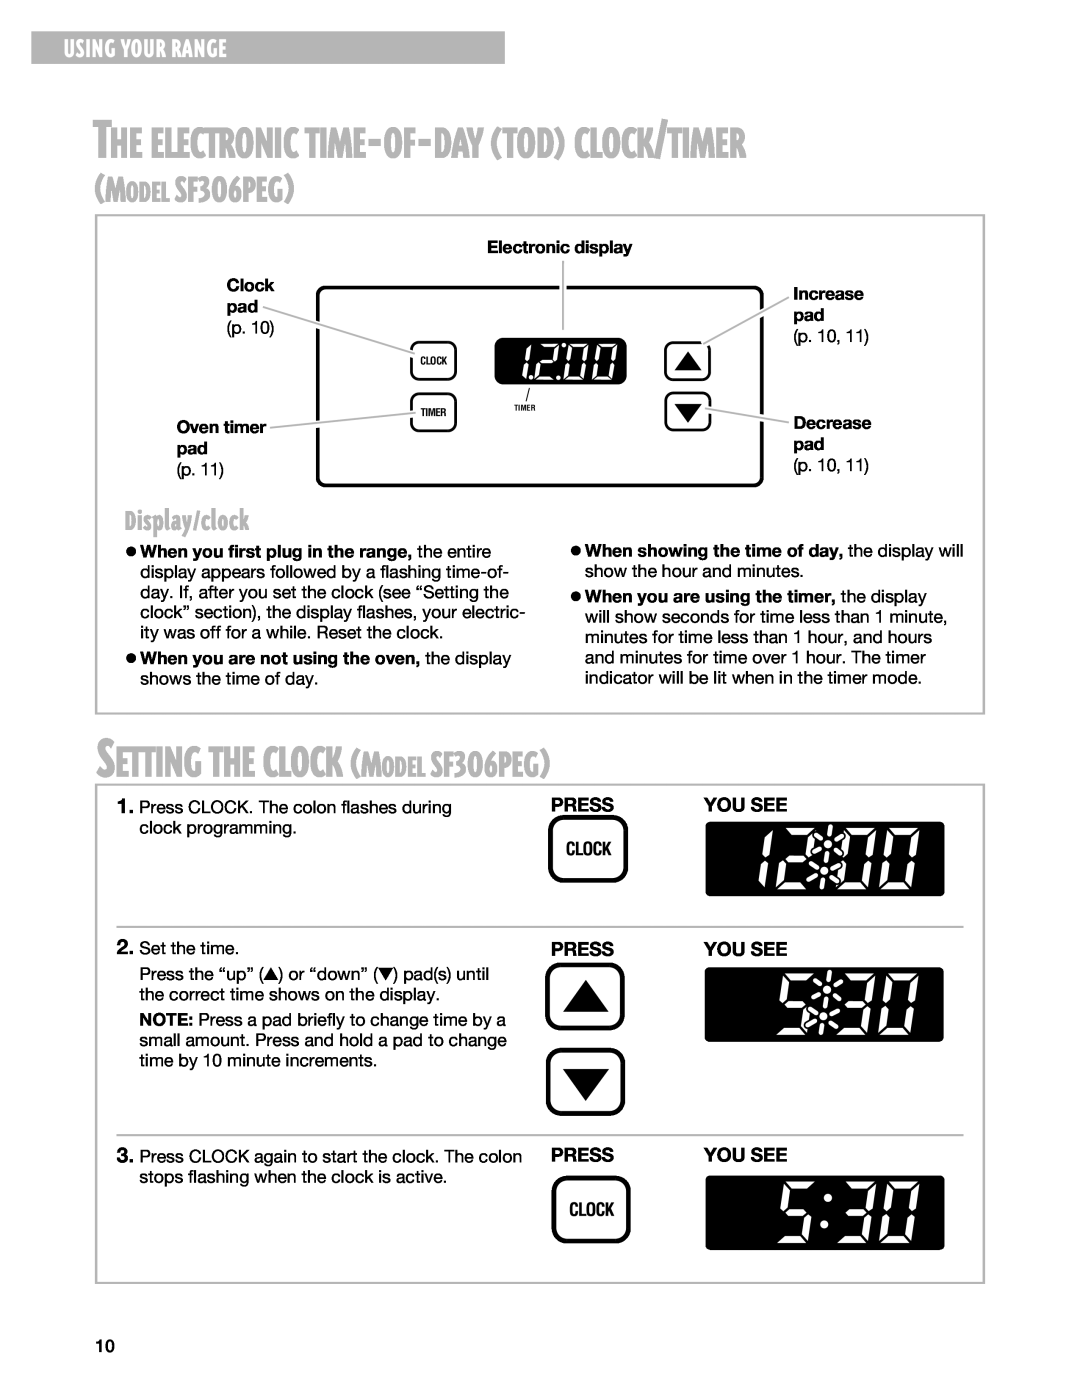 Whirlpool SF306PEG SETTING THE CLOCK MODEL SF3O6PEG, Display/clock, The Electronic Time-Of-Day Tod Clock/Timer, Press 